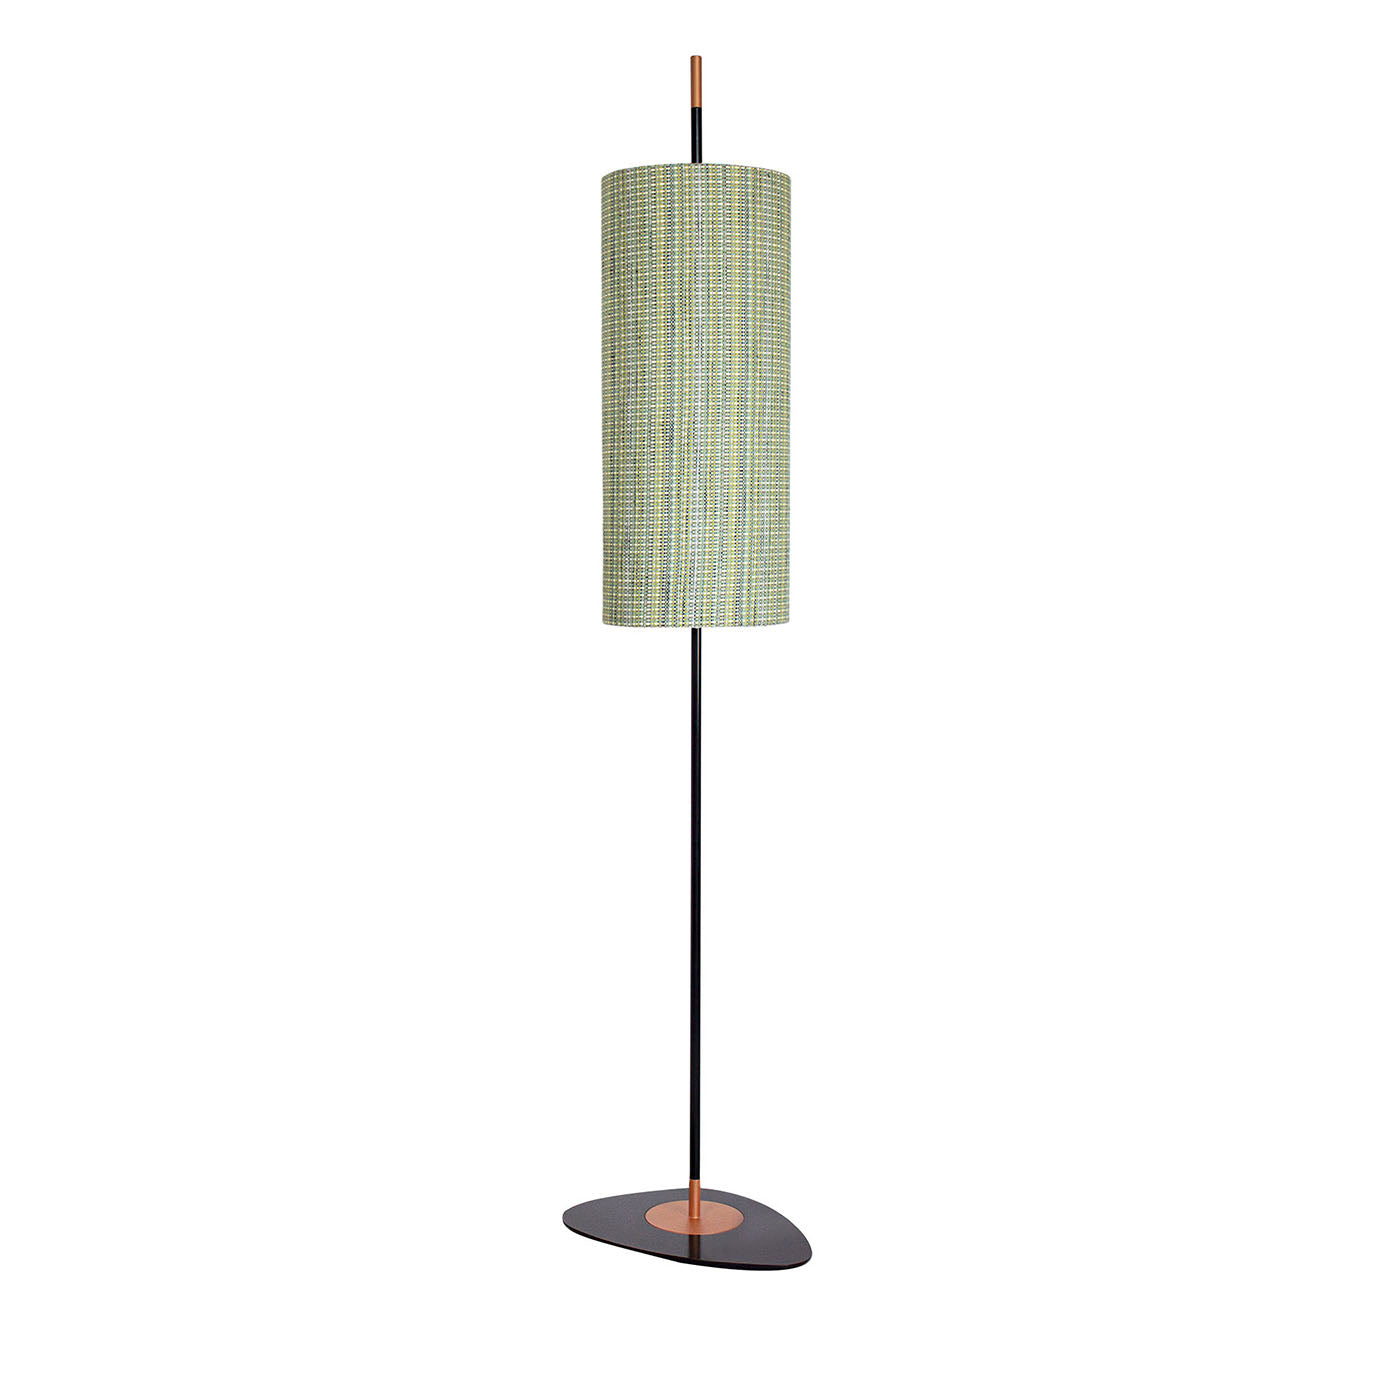 Lagoon Dominica Caraibes Large Outdoor Floor Lamp by Servomuto - Main view